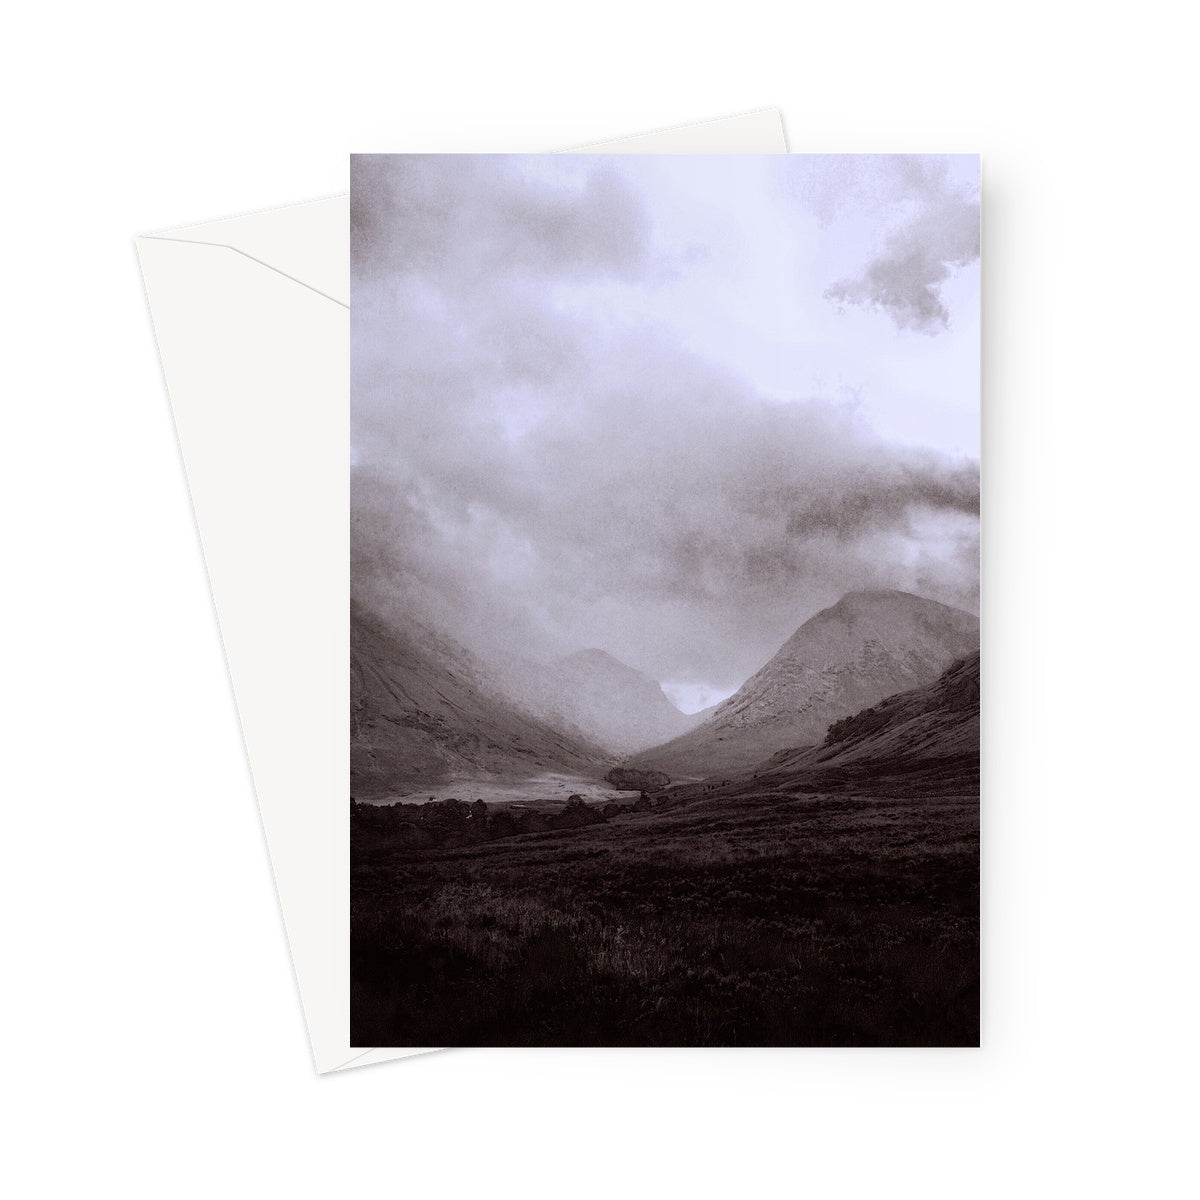 Glencoe Mist Art Gifts Greeting Card-Greetings Cards-Glencoe Art Gallery-5"x7"-10 Cards-Paintings, Prints, Homeware, Art Gifts From Scotland By Scottish Artist Kevin Hunter